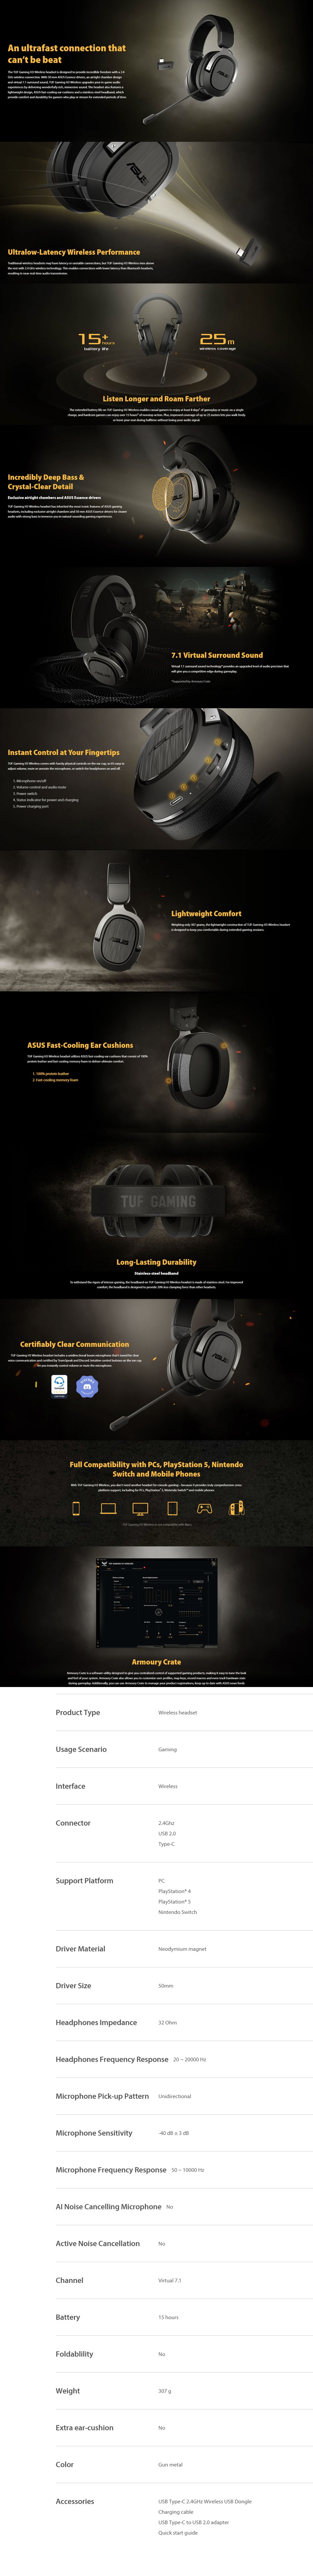 A large marketing image providing additional information about the product ASUS TUF Gaming H3 Wireless Gaming Headset - Additional alt info not provided